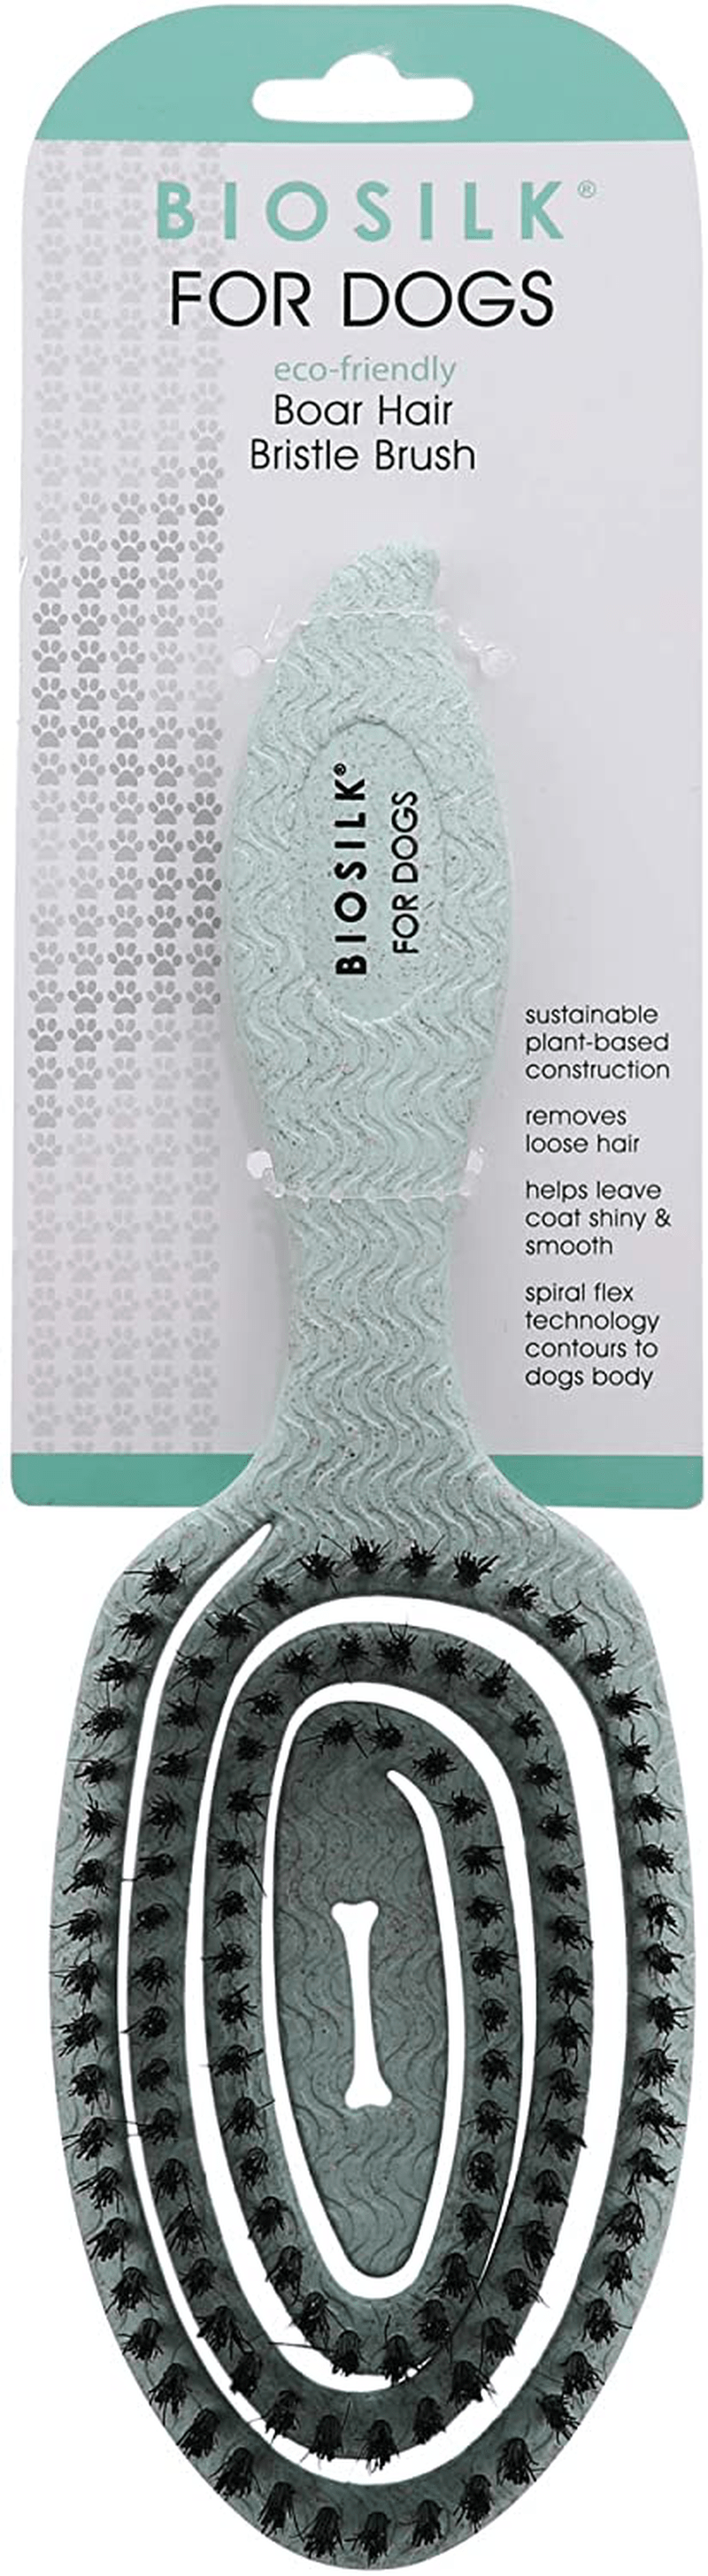 BioSilk for Dogs Eco-Friendly Grooming Brush for Dogs in Mint Green | Easy to Hold Ergonomic Handle Dog Brushes| Best Pet Brush for Dog Grooming and Detangling Animals & Pet Supplies > Pet Supplies > Dog Supplies BioSilk Boar Hair Bristle Brush  